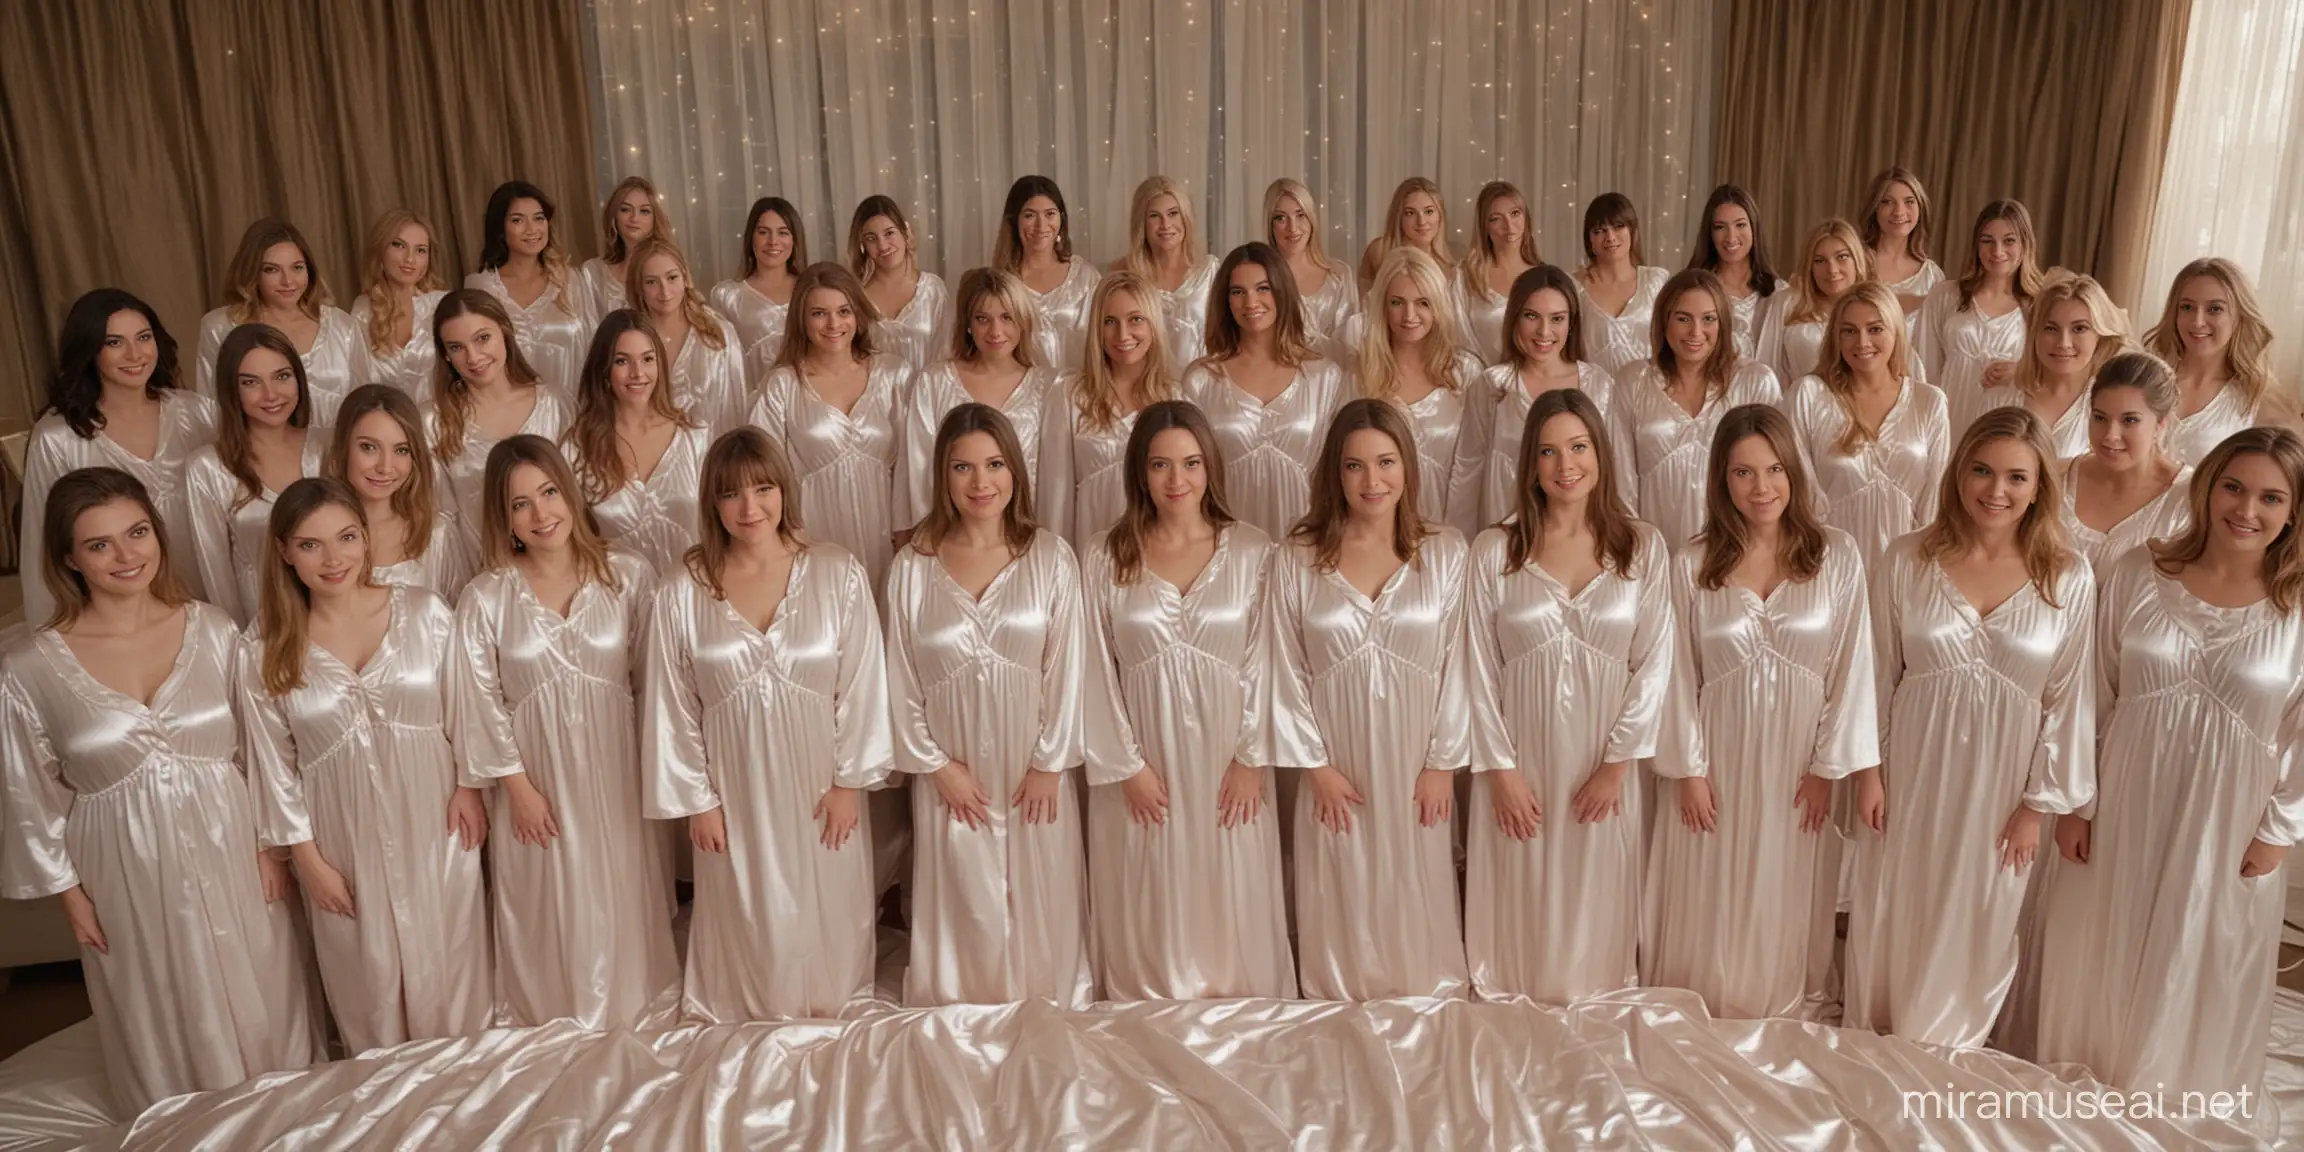 Ethereal Gathering Serene Women in Satin Nightgowns on a Giant Bed